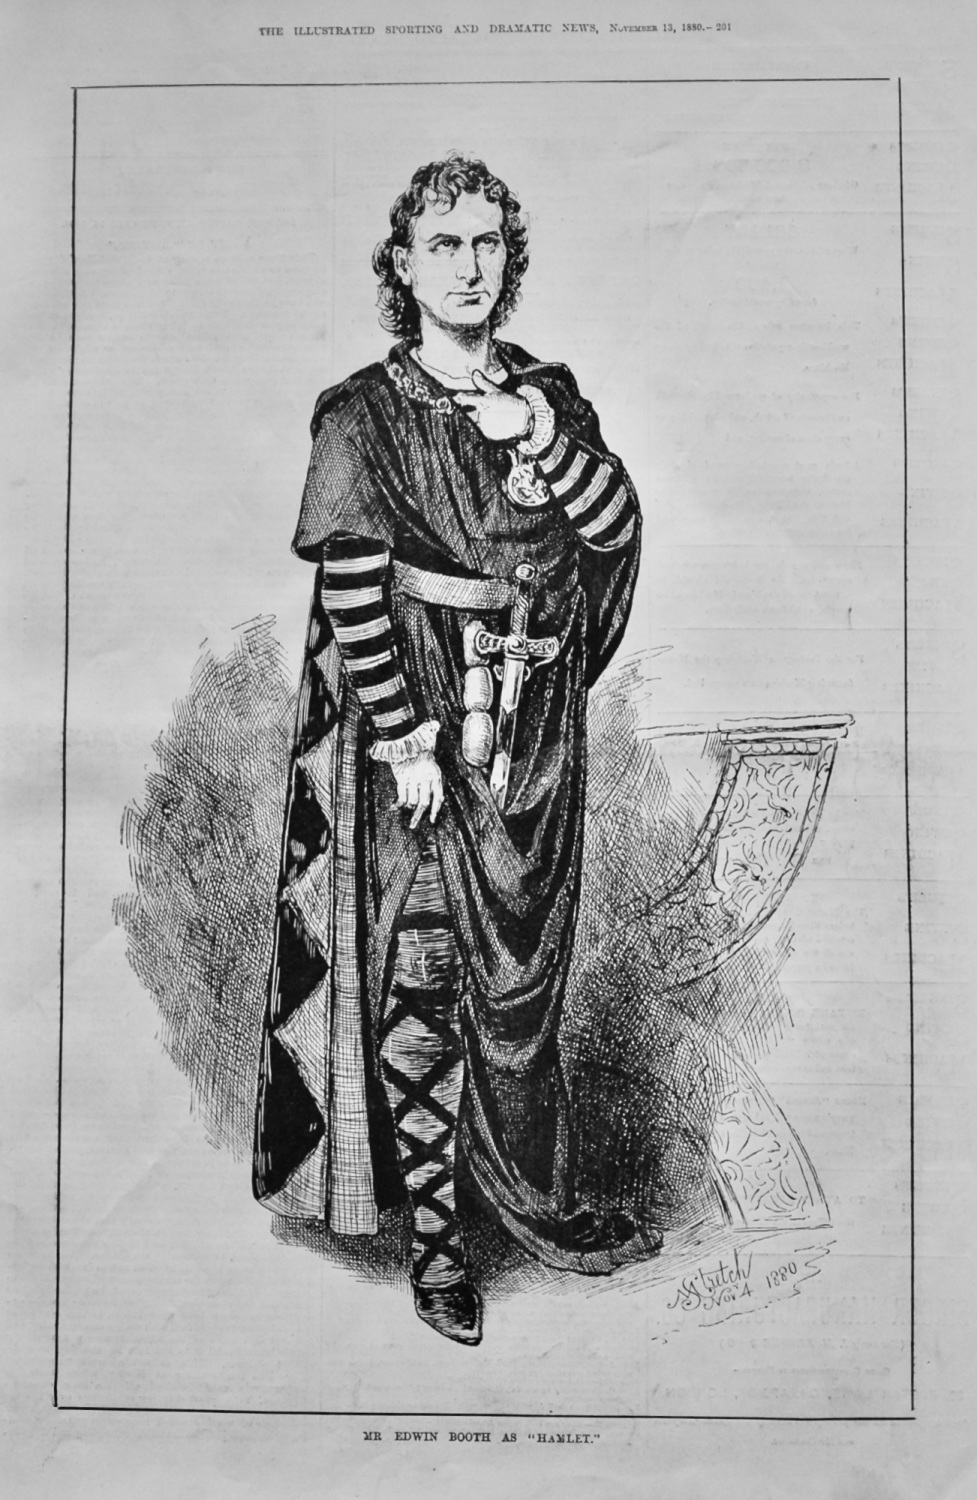 Mr. Edwin Booth as 